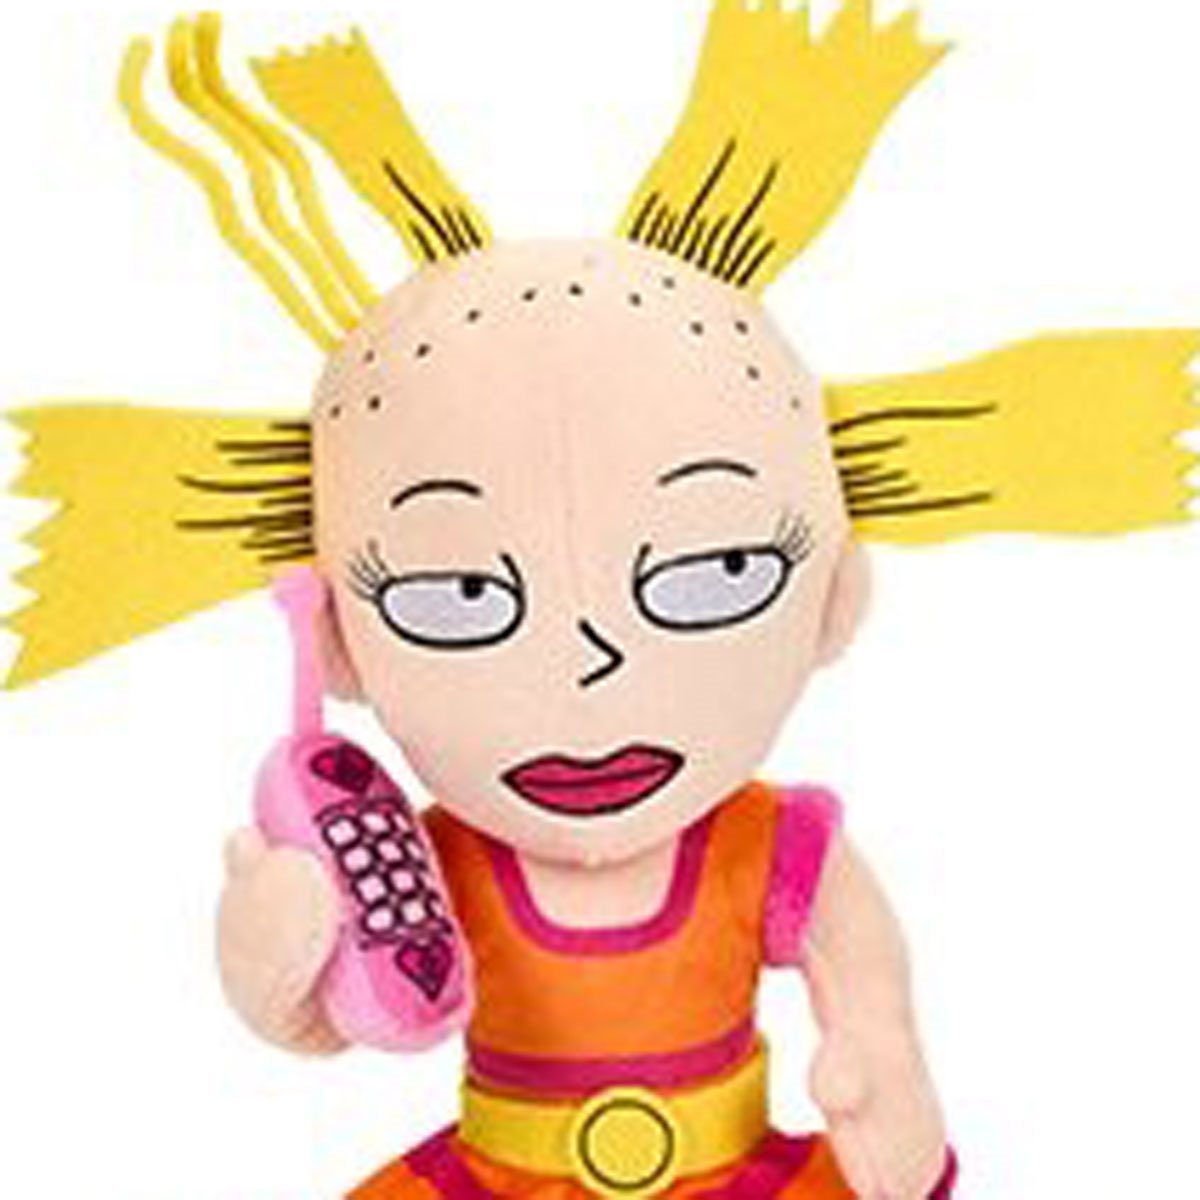 blonde doll from rugrats